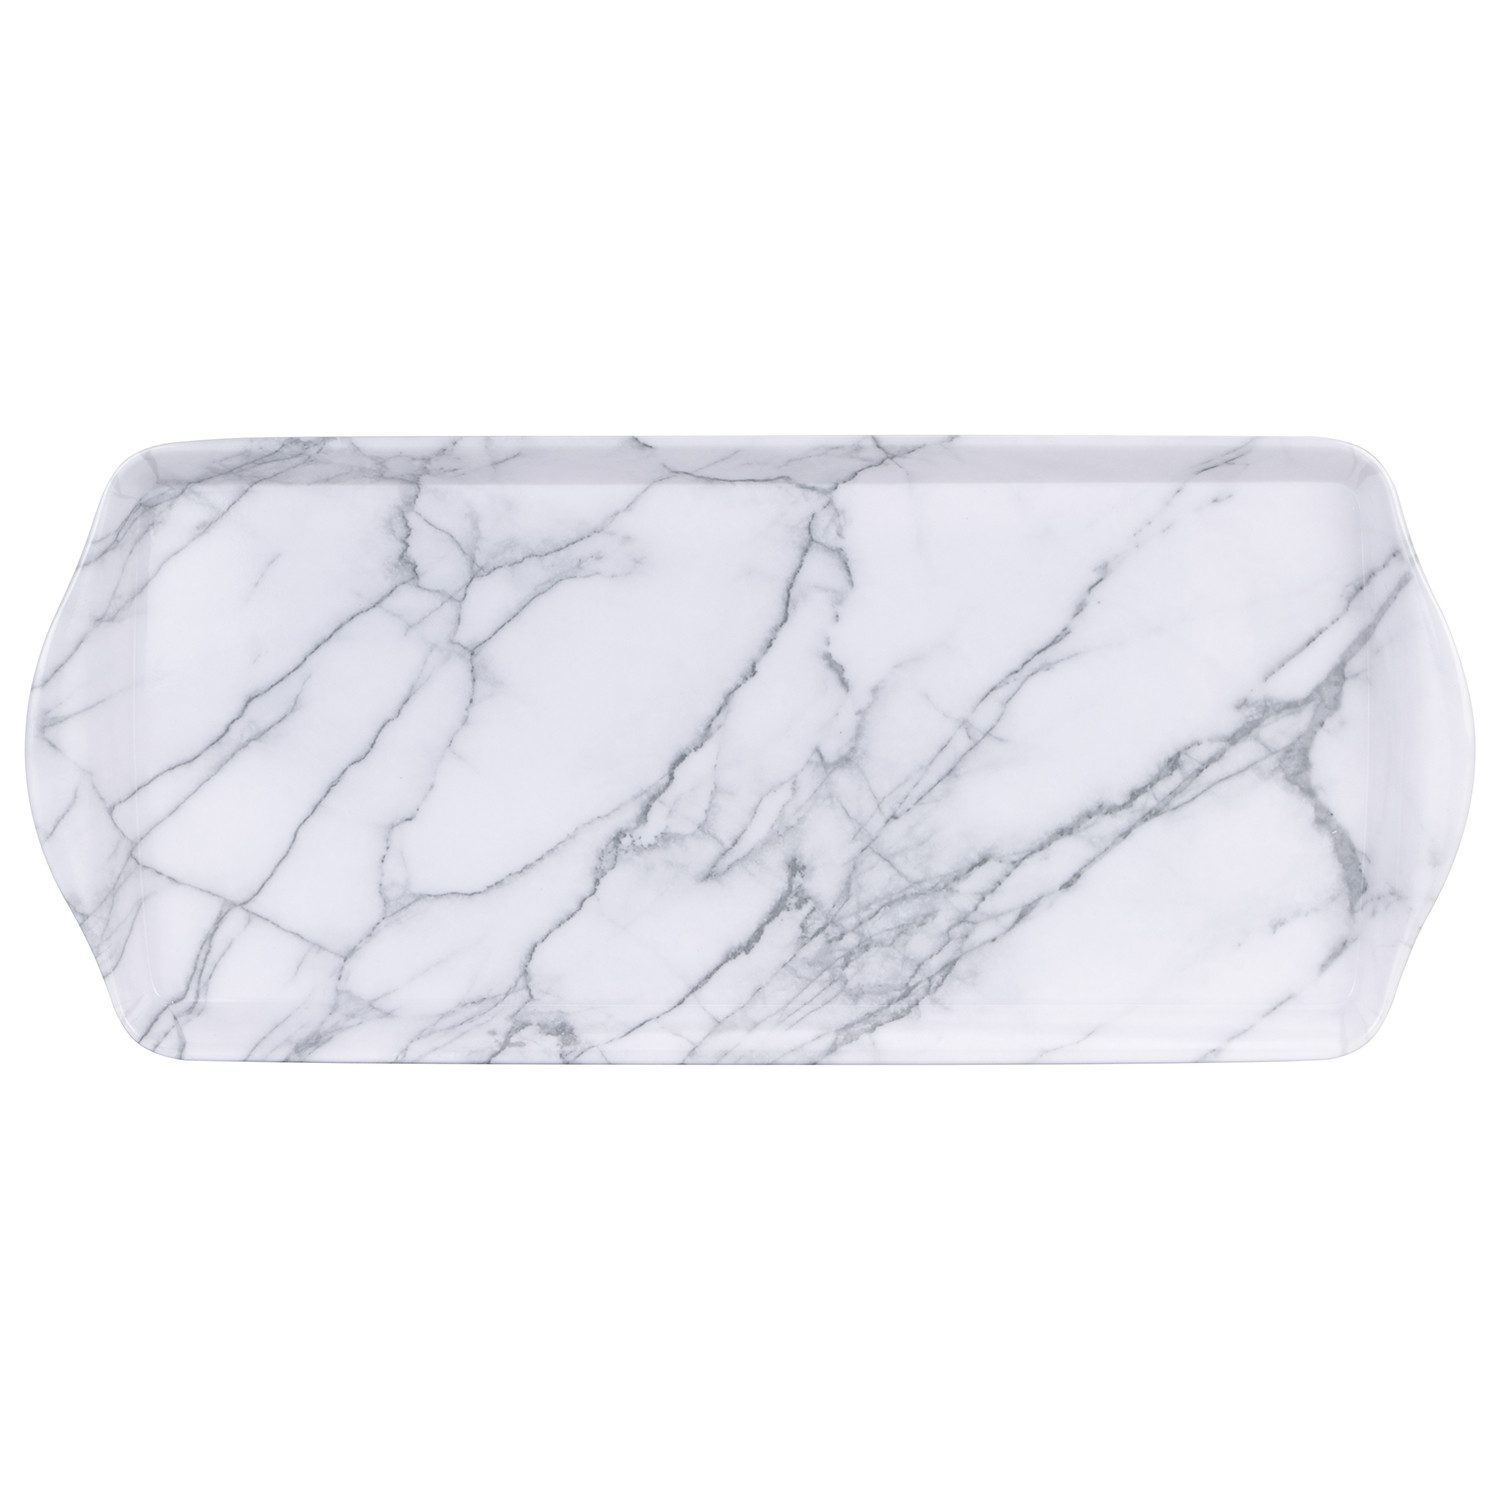 White Marble Long Drinks Serving Tray Image 1